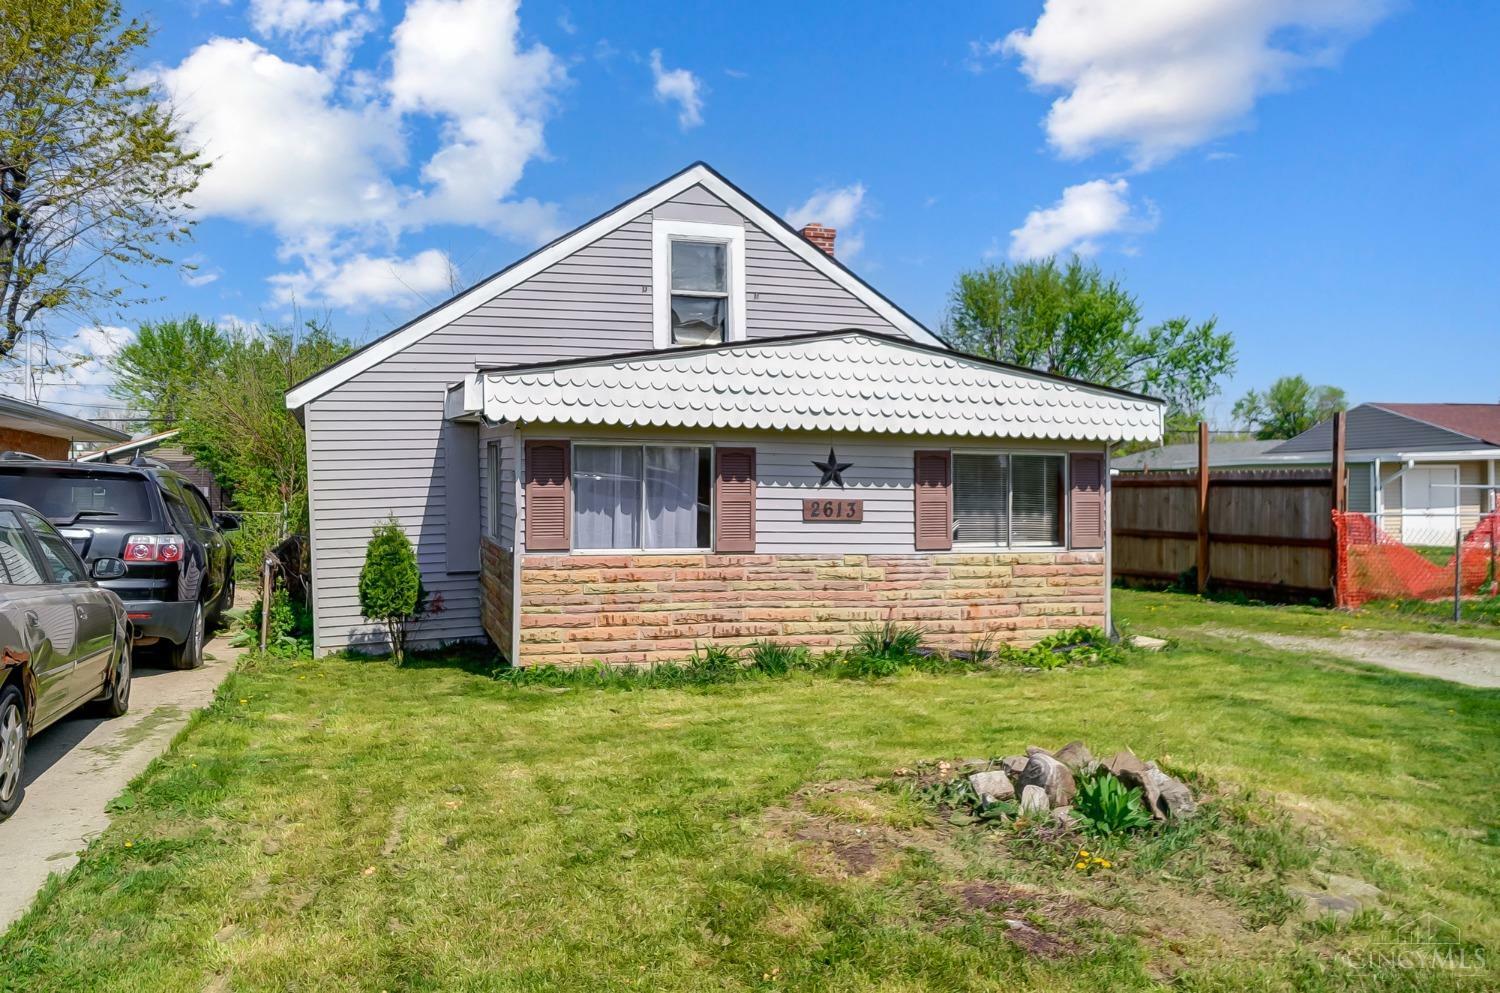 Property Photo:  2613 Ome Avenue  OH 45414 